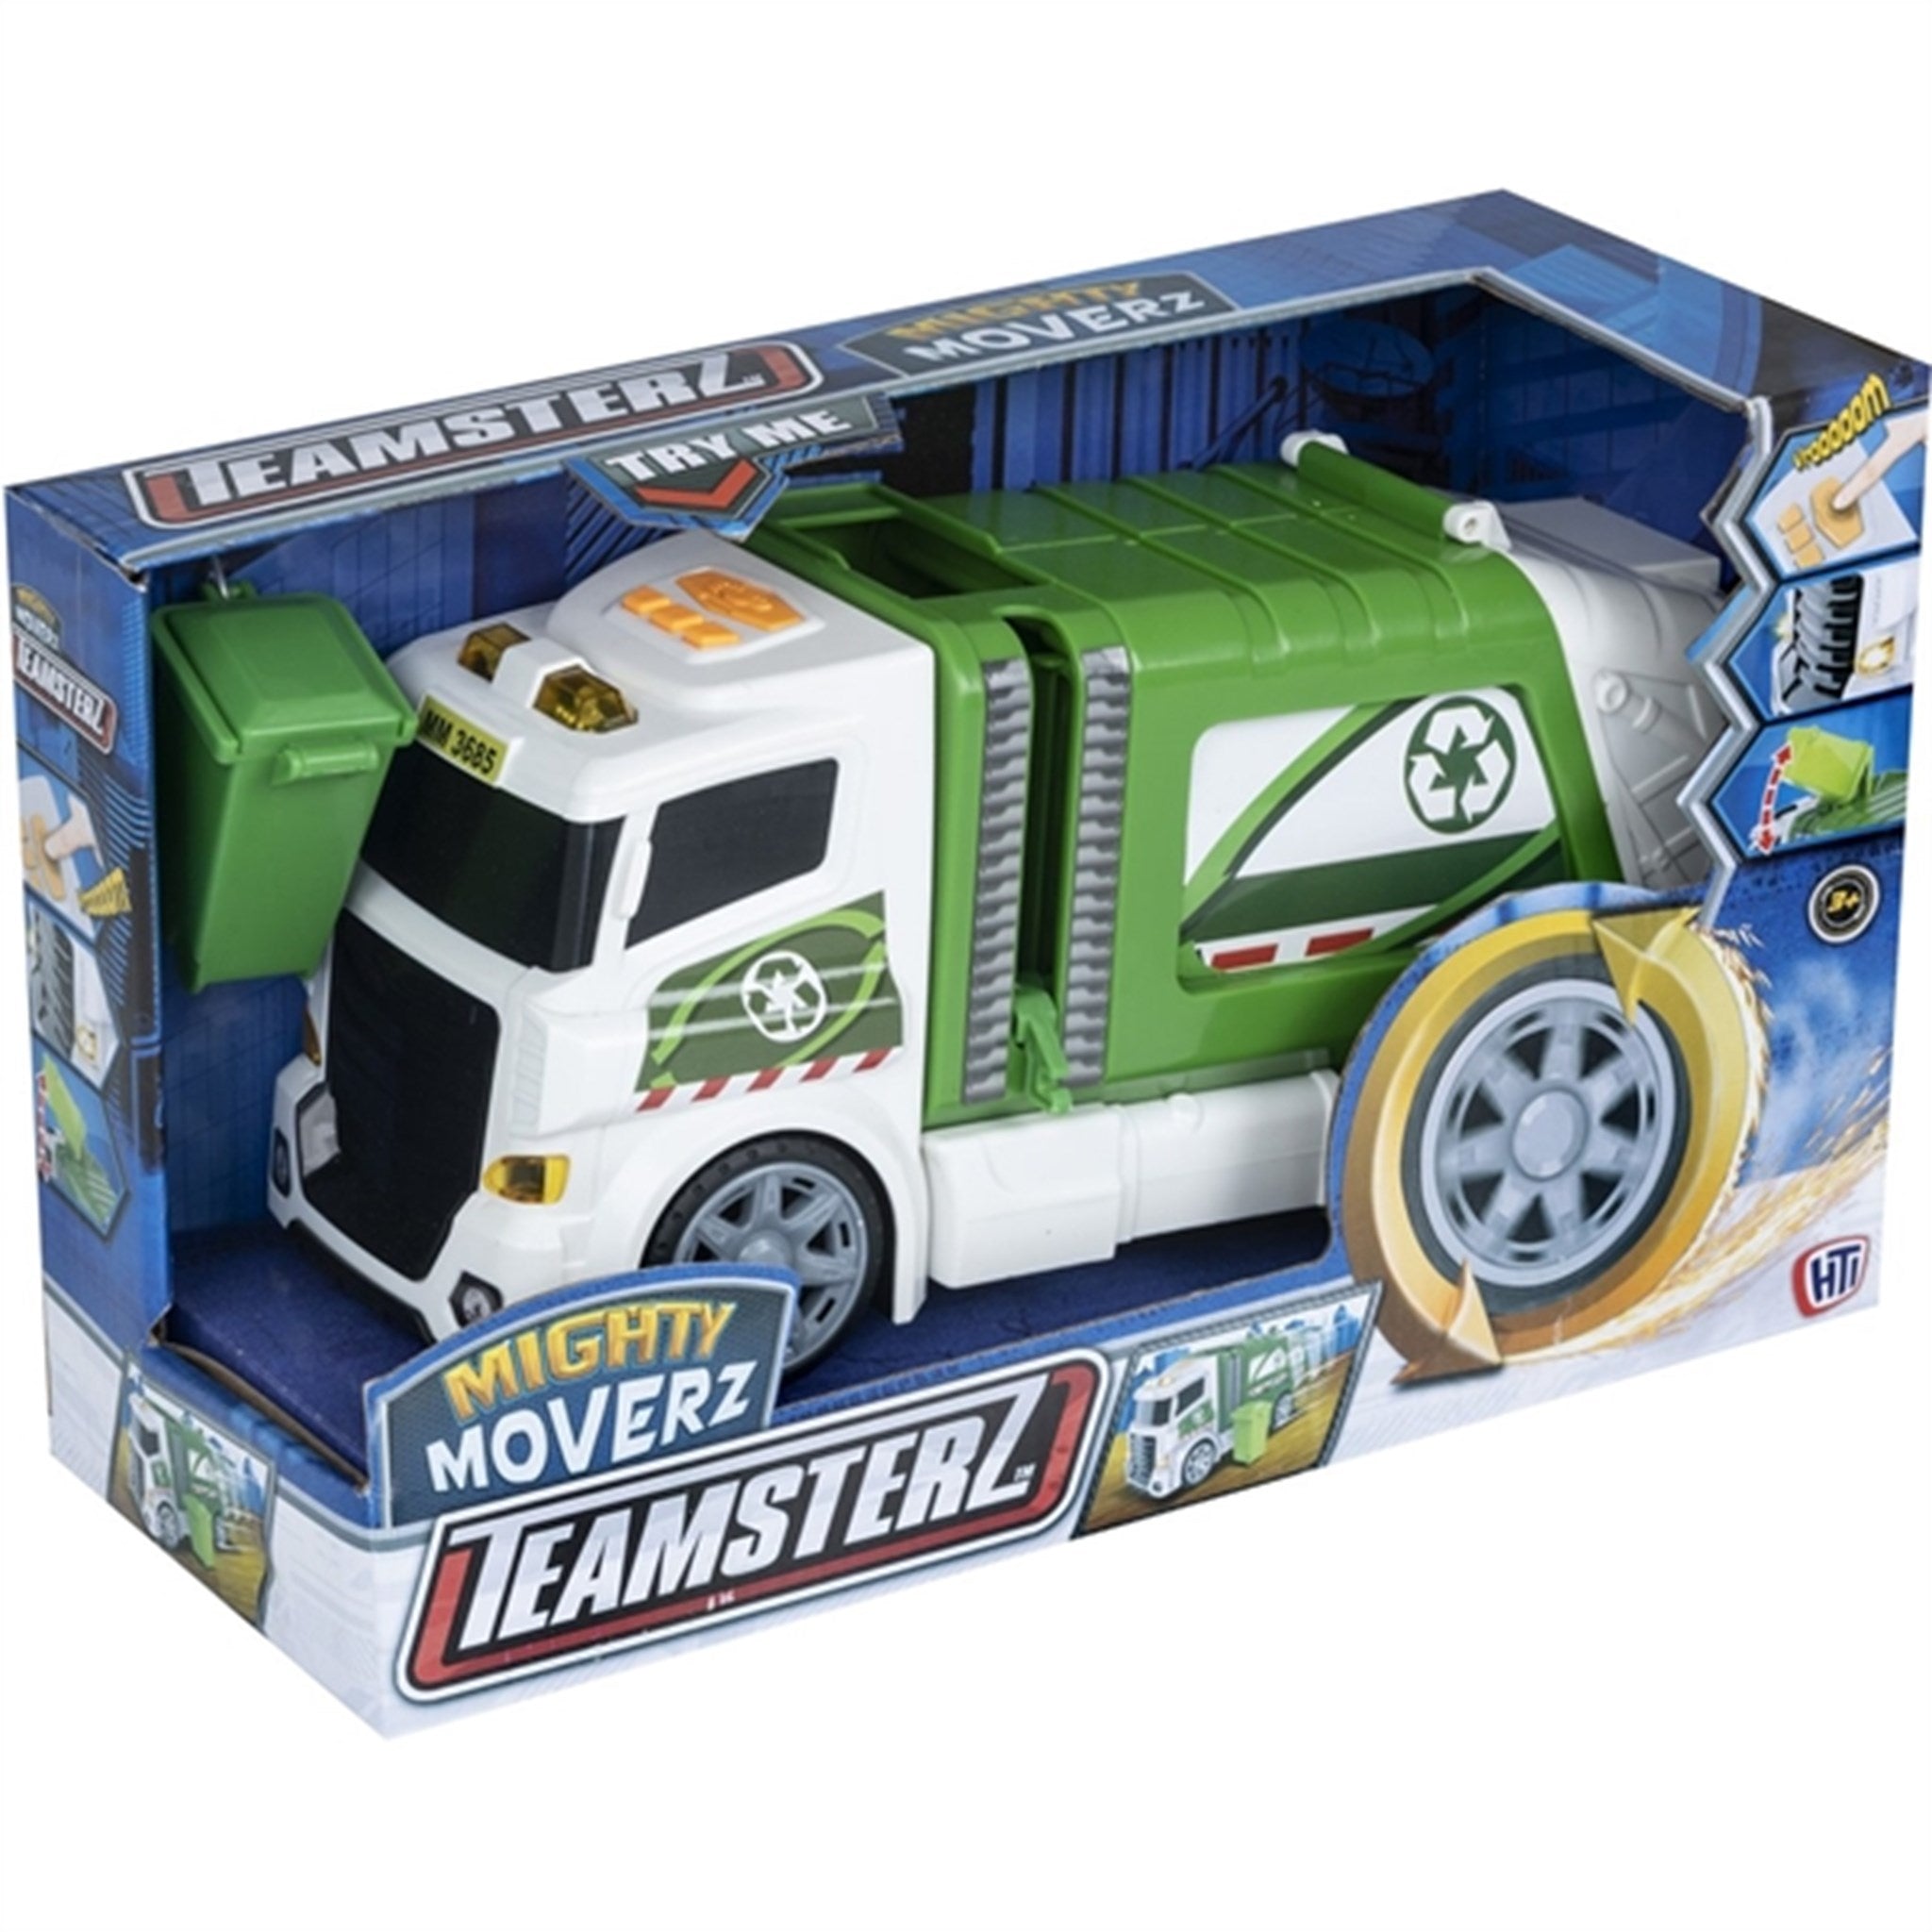 Teamsterz Mighty Moverz Garbage Truck 8